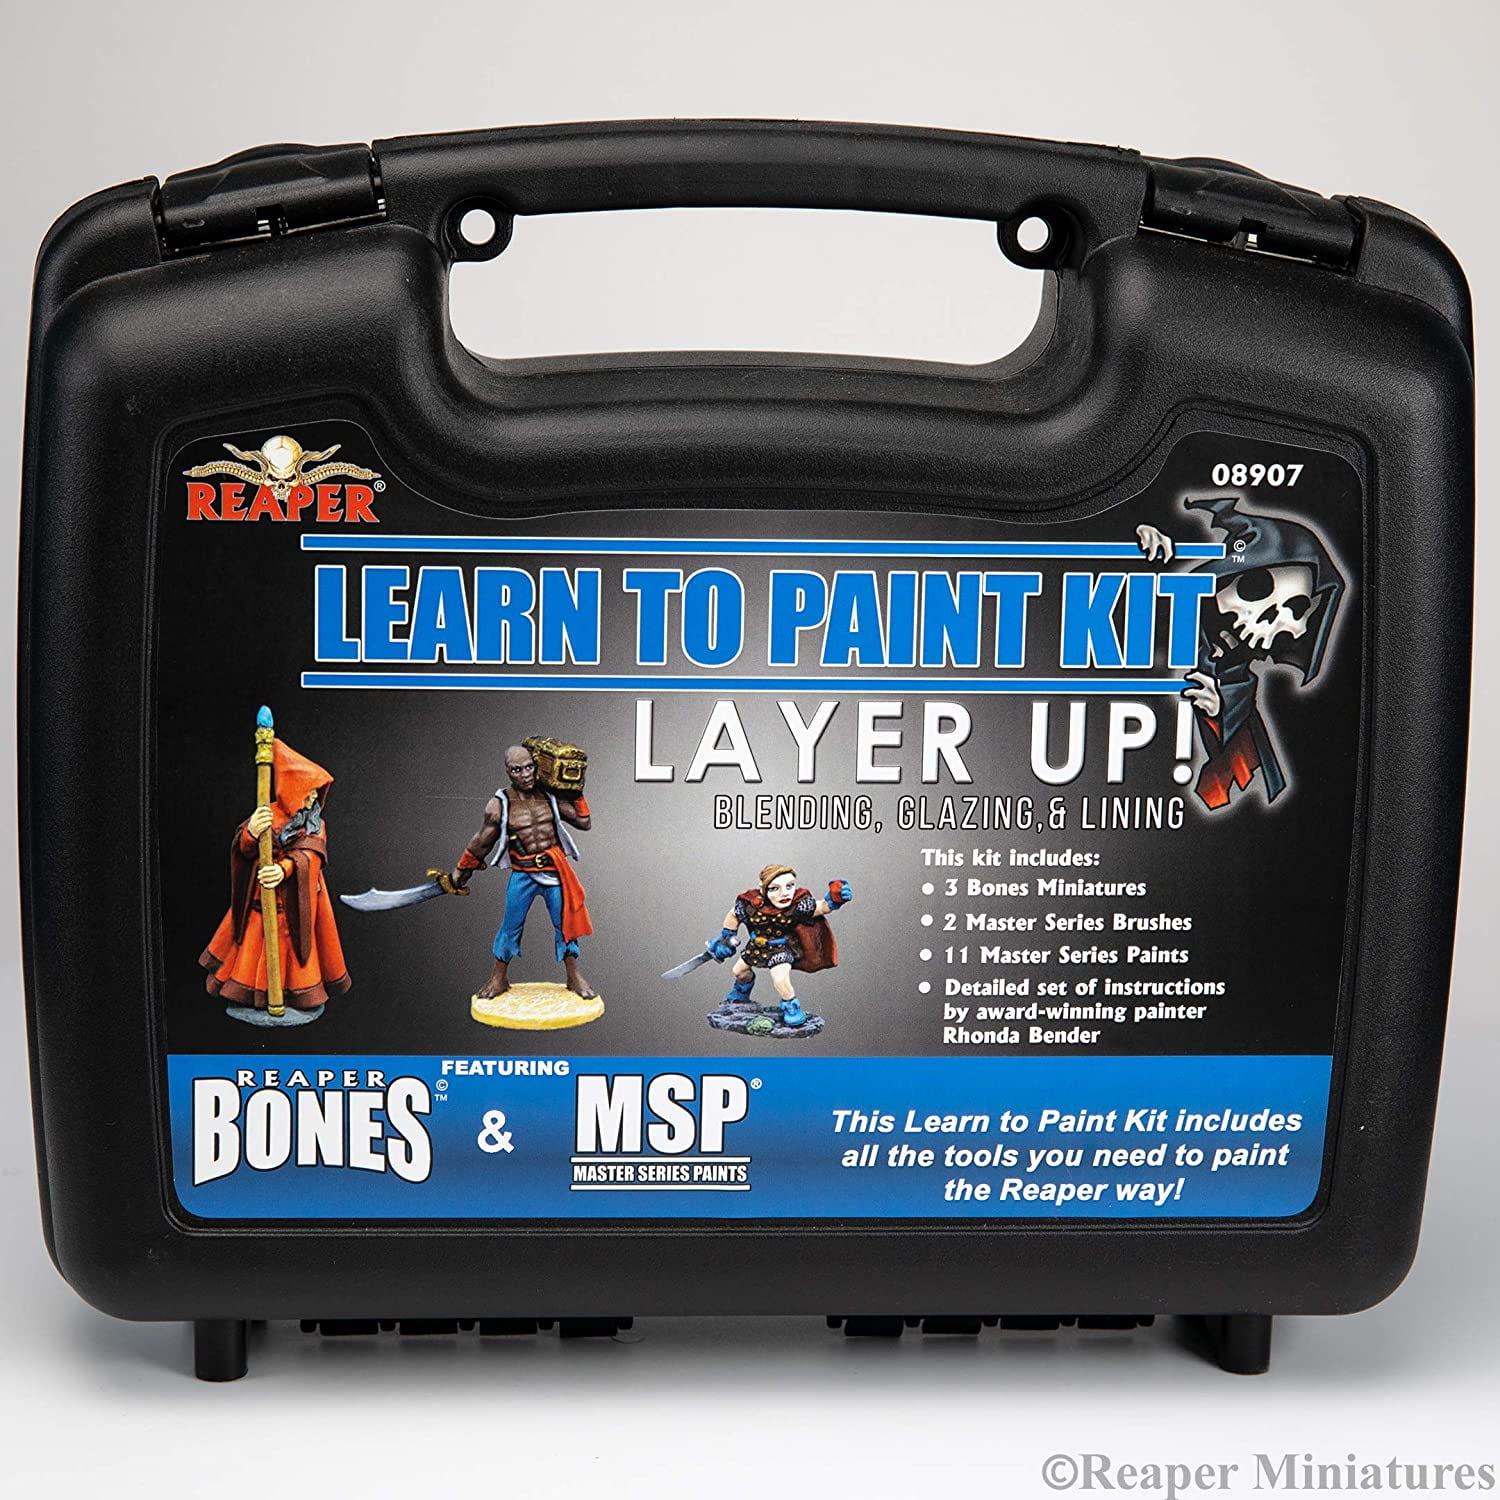 Master Series Paint 1/2 oz Oiled leather by Reaper Miniatures RPR 09110 